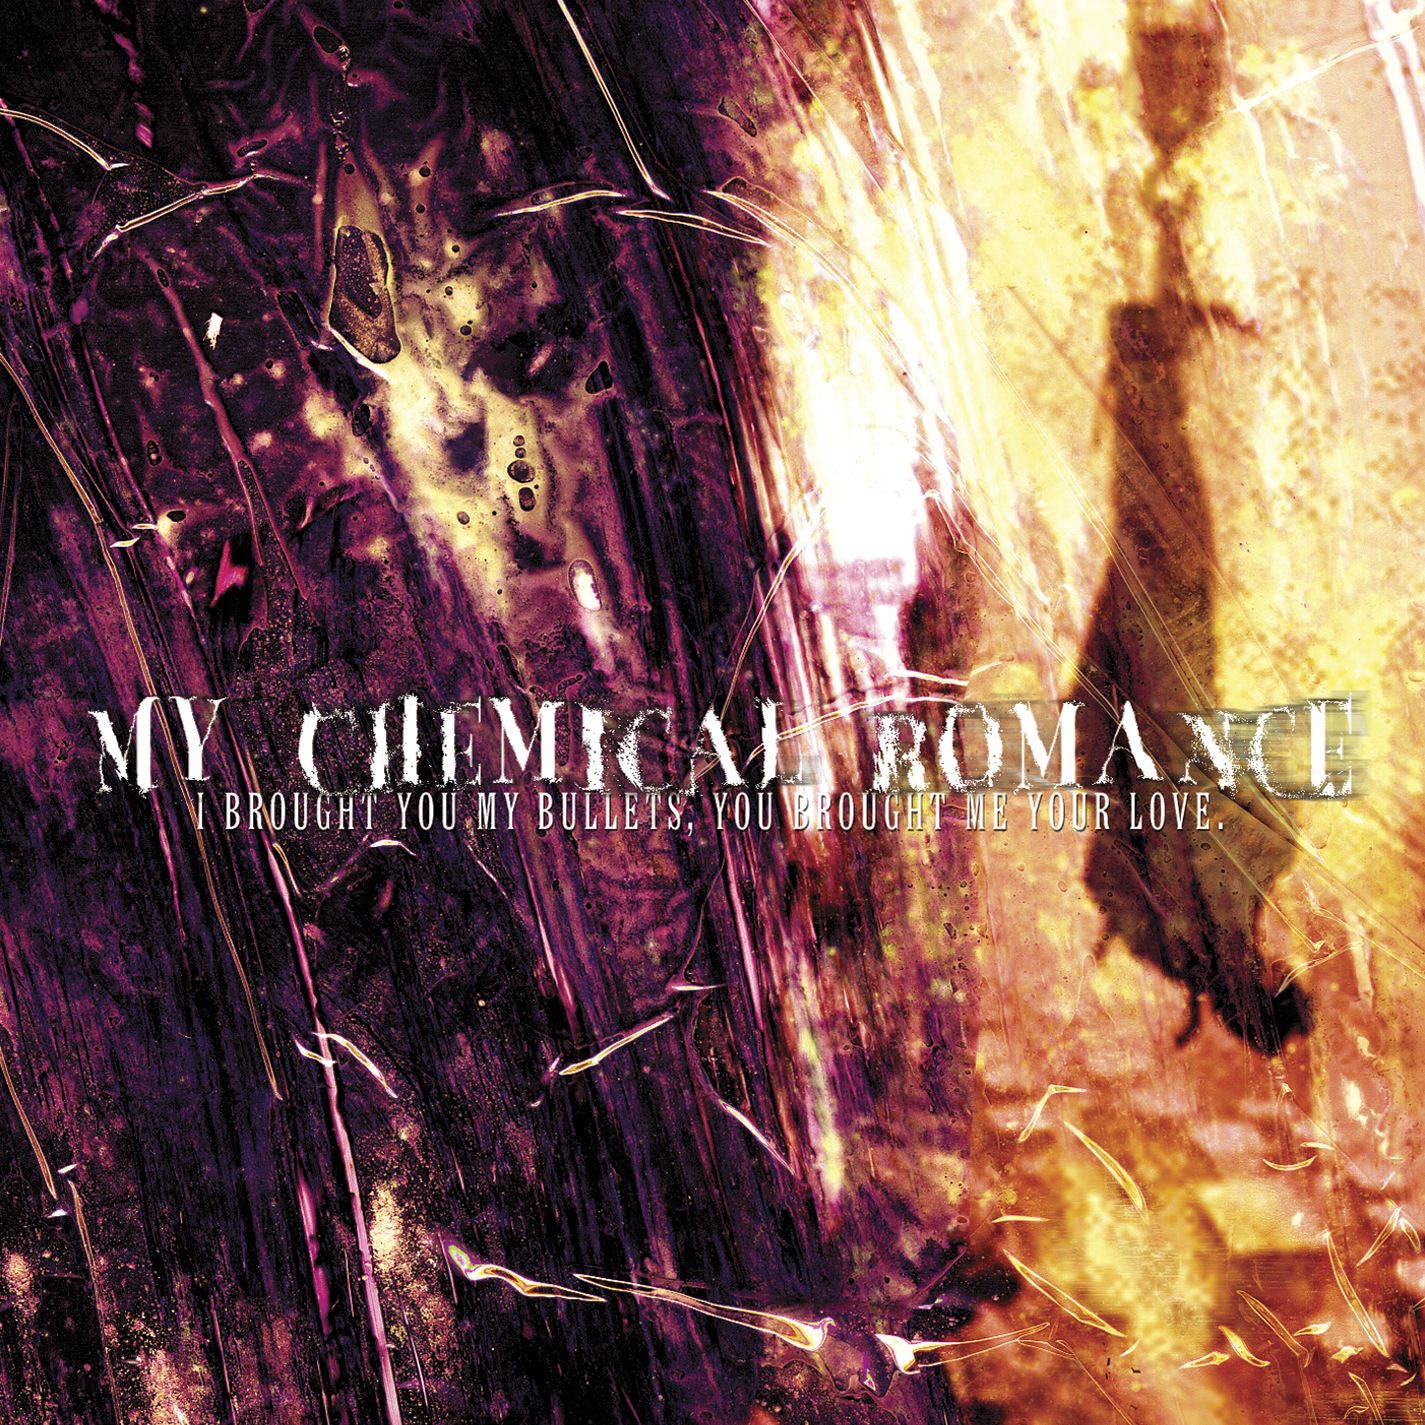 My Chemical Romance - I Brought You My Bullets, You Brought Me Your Love [Picture Disc]